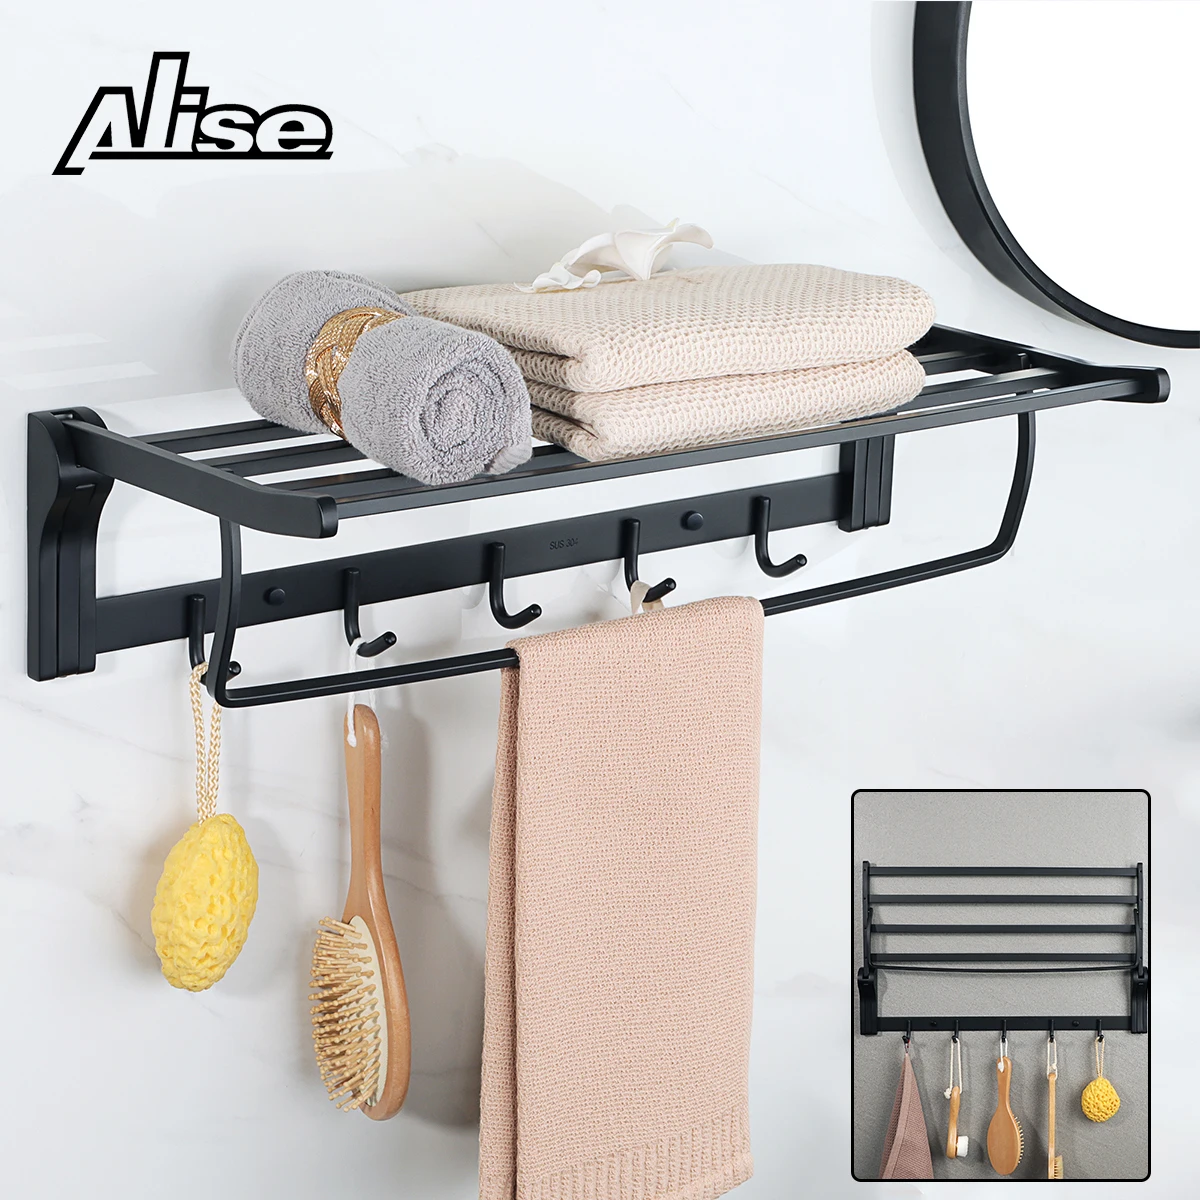 

60cm Black Towel Rail Wall Mounted SUS304 Stainless Steel Towel Rack Shelves Towel Holder with Double Towel Bars for Bathroom